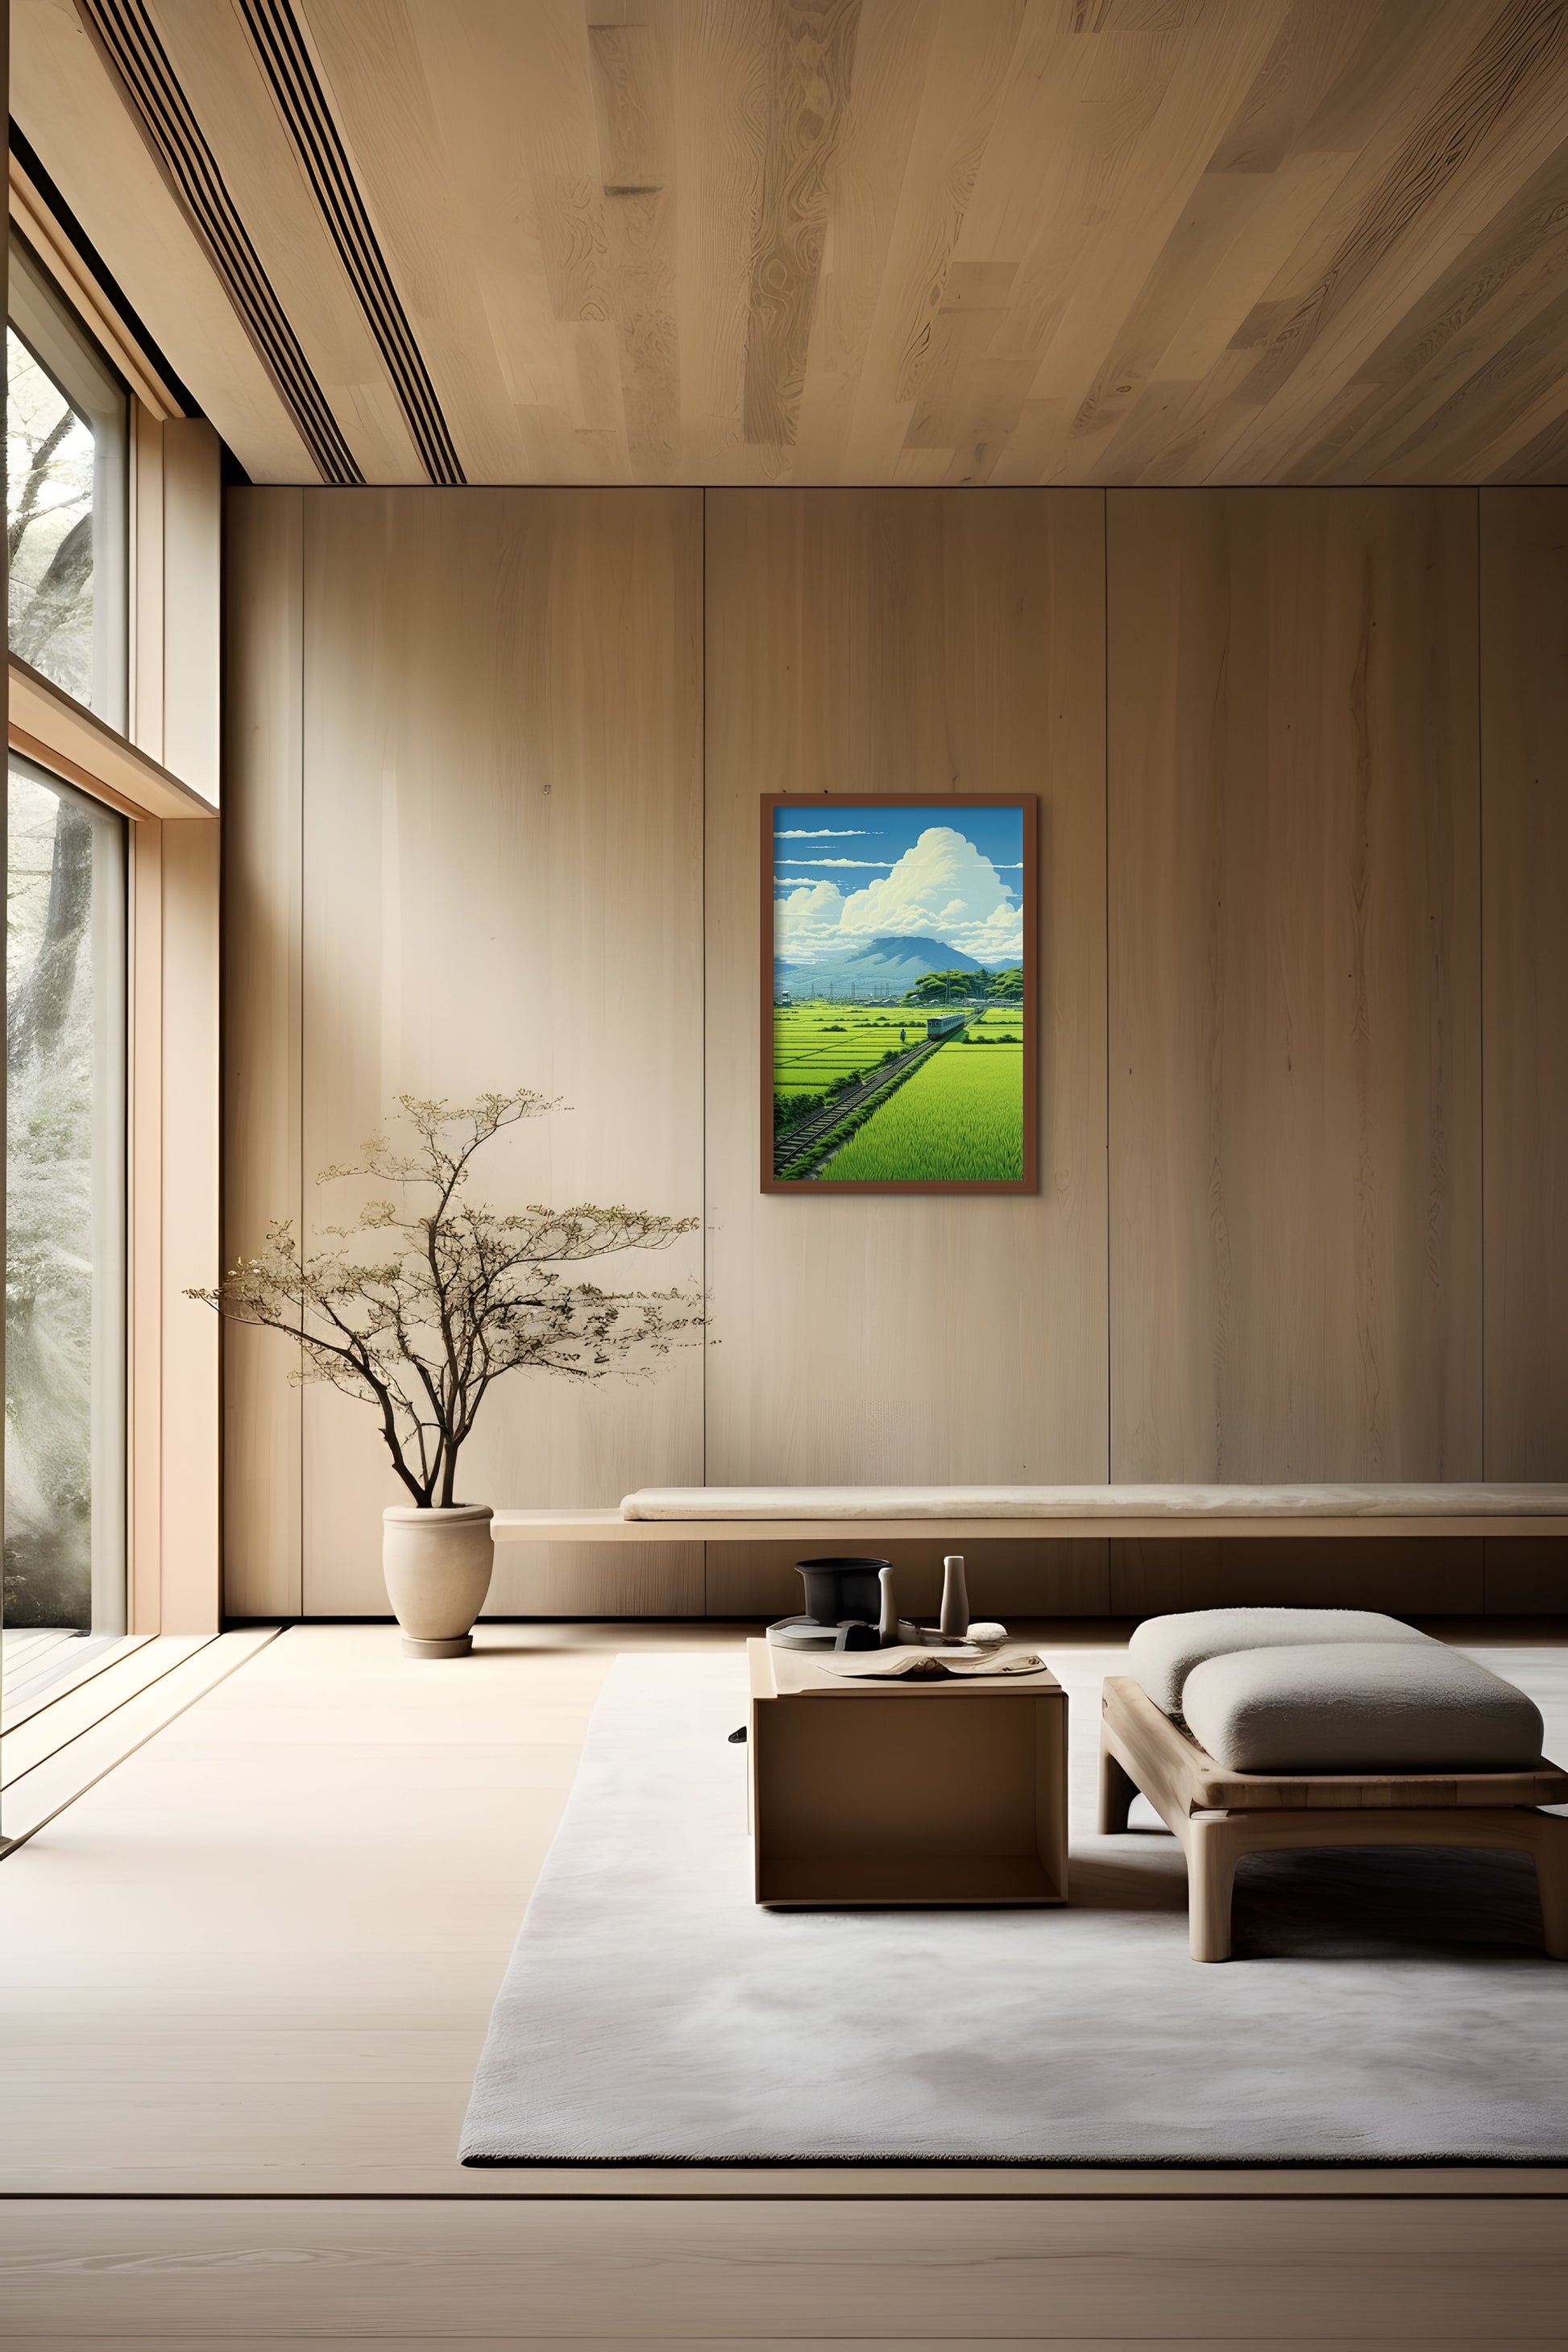 Modern minimalist interior with wooden walls, a large window, and a painting on the wall.